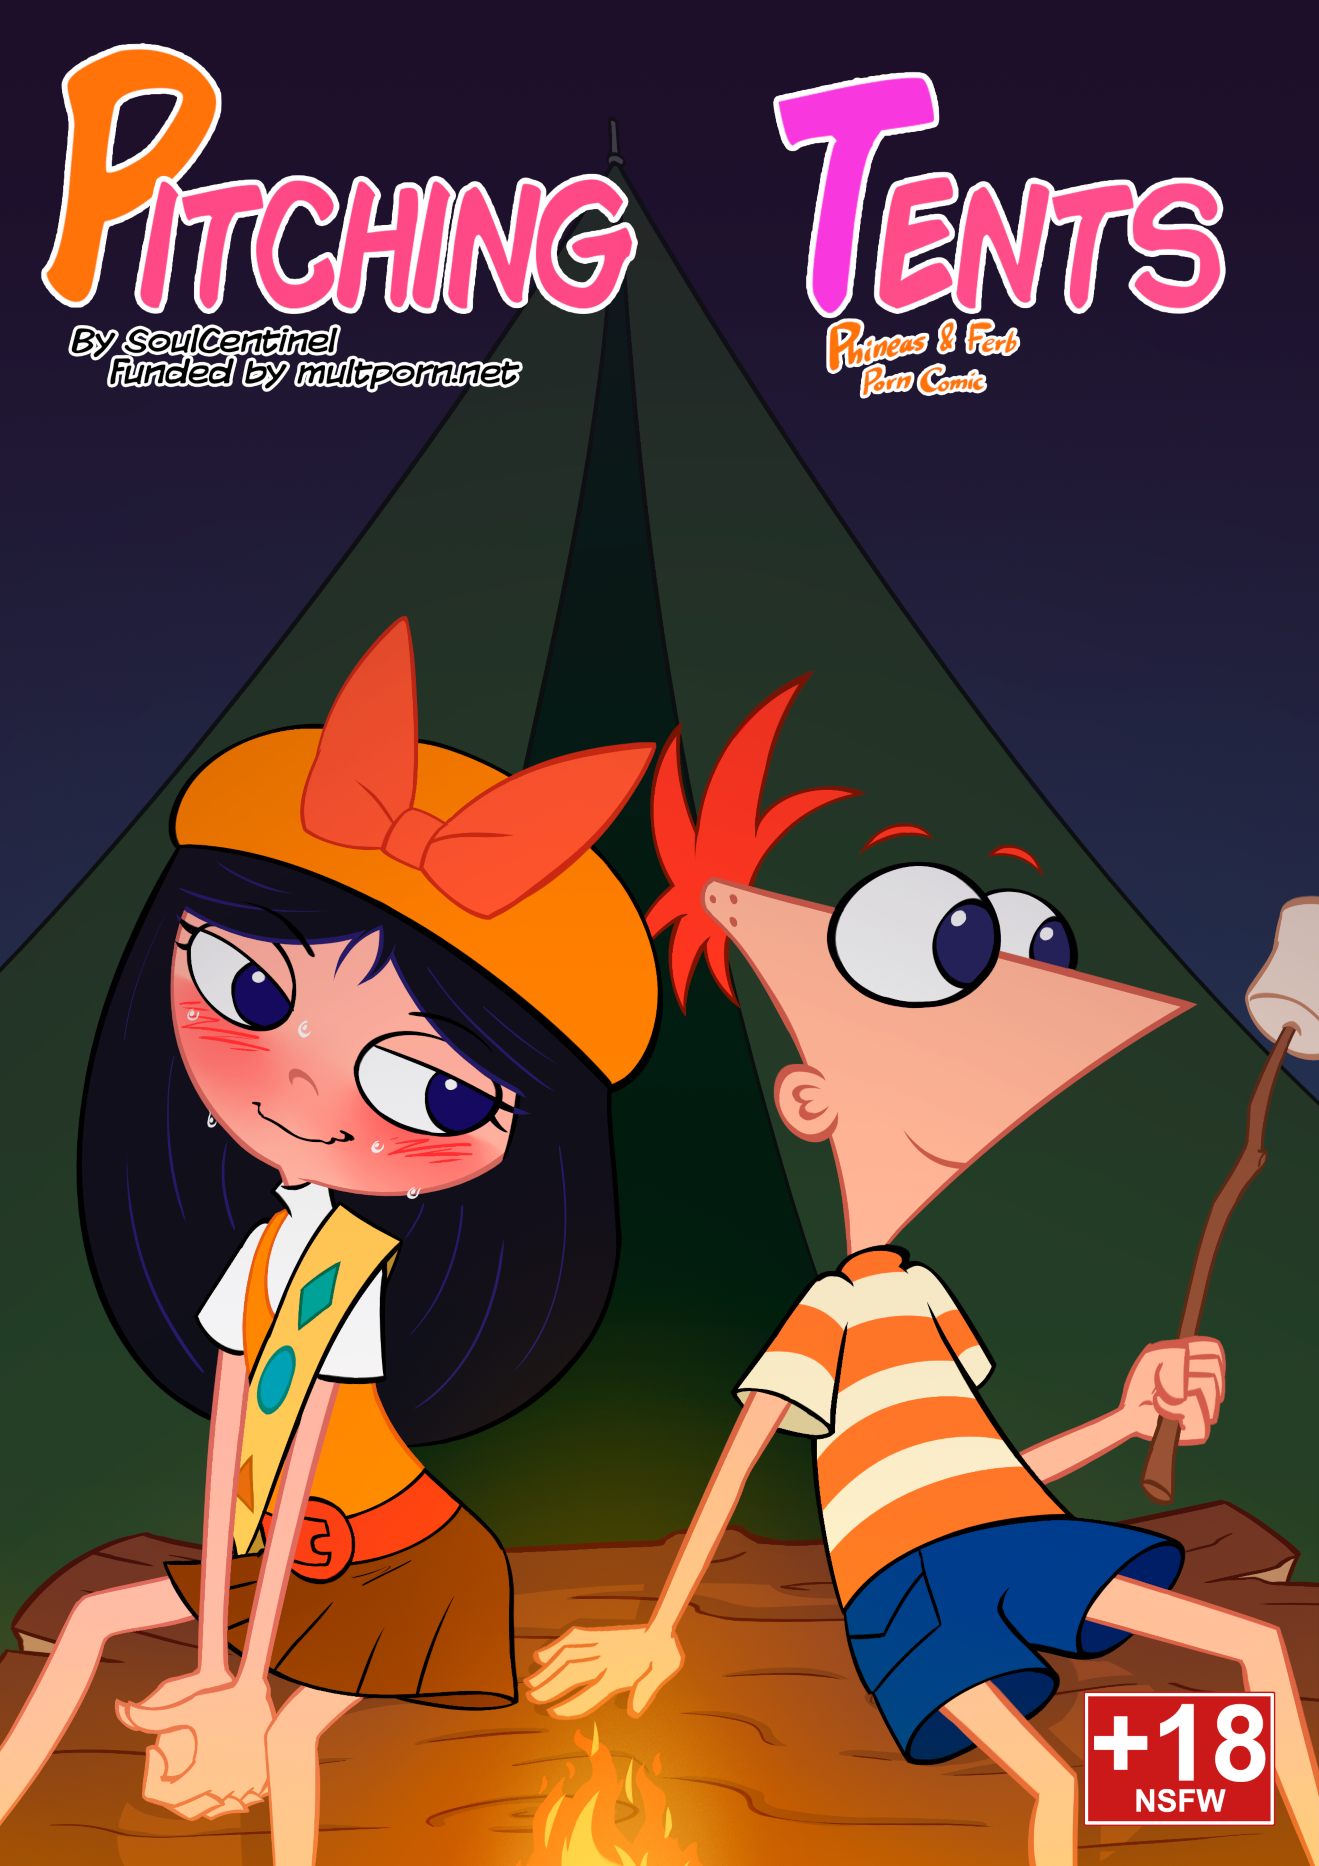 Phineas And Ferb Lesbians Comics - Pitching Tents - Phineas and Ferb [SoulCentinel] - FreeAdultComix